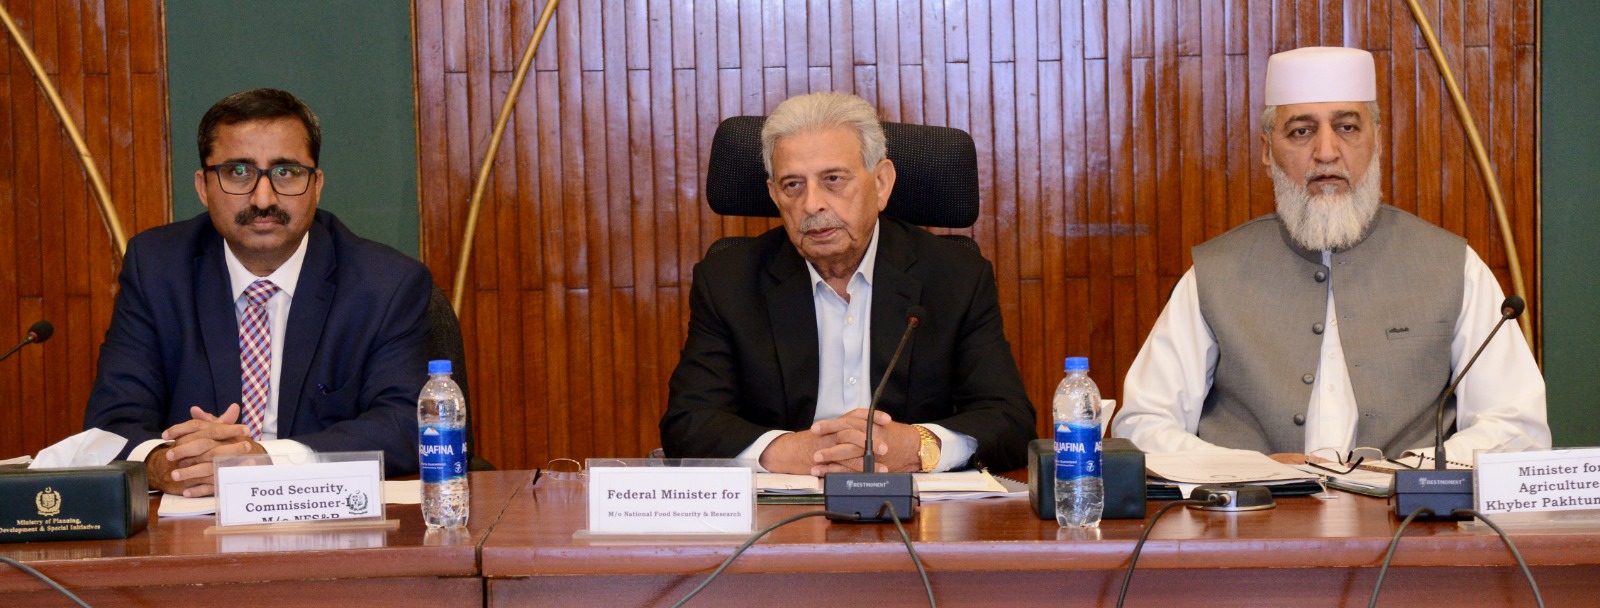 Government envisions enhancing Agriculture based Economic Growth to Benefit the Poor – Rana Tanveer